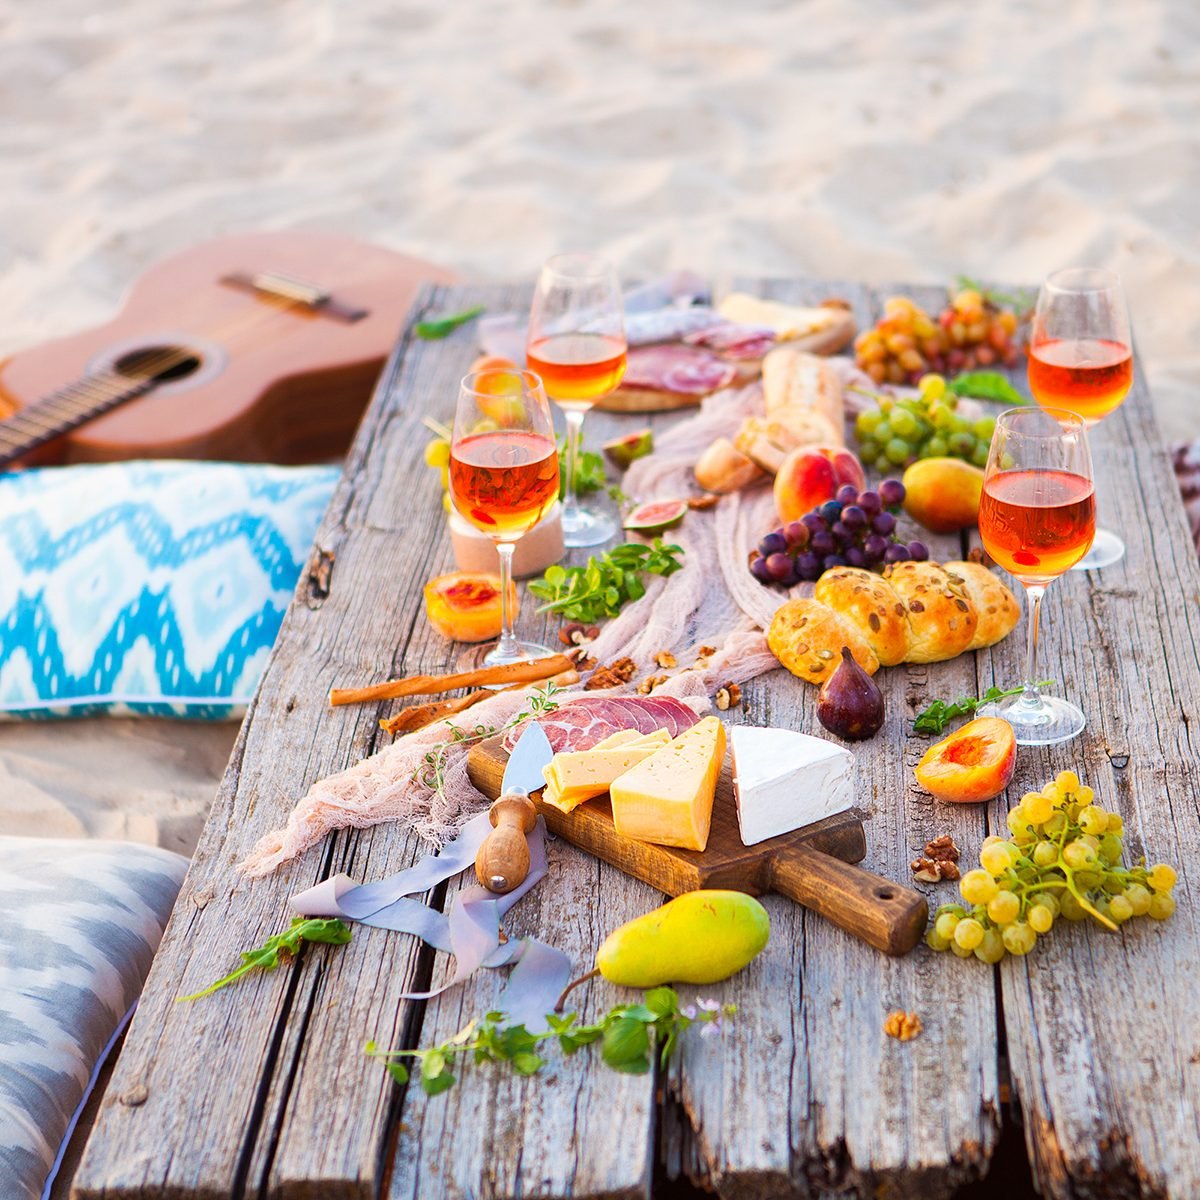 What To Bring For A Beach Picnic